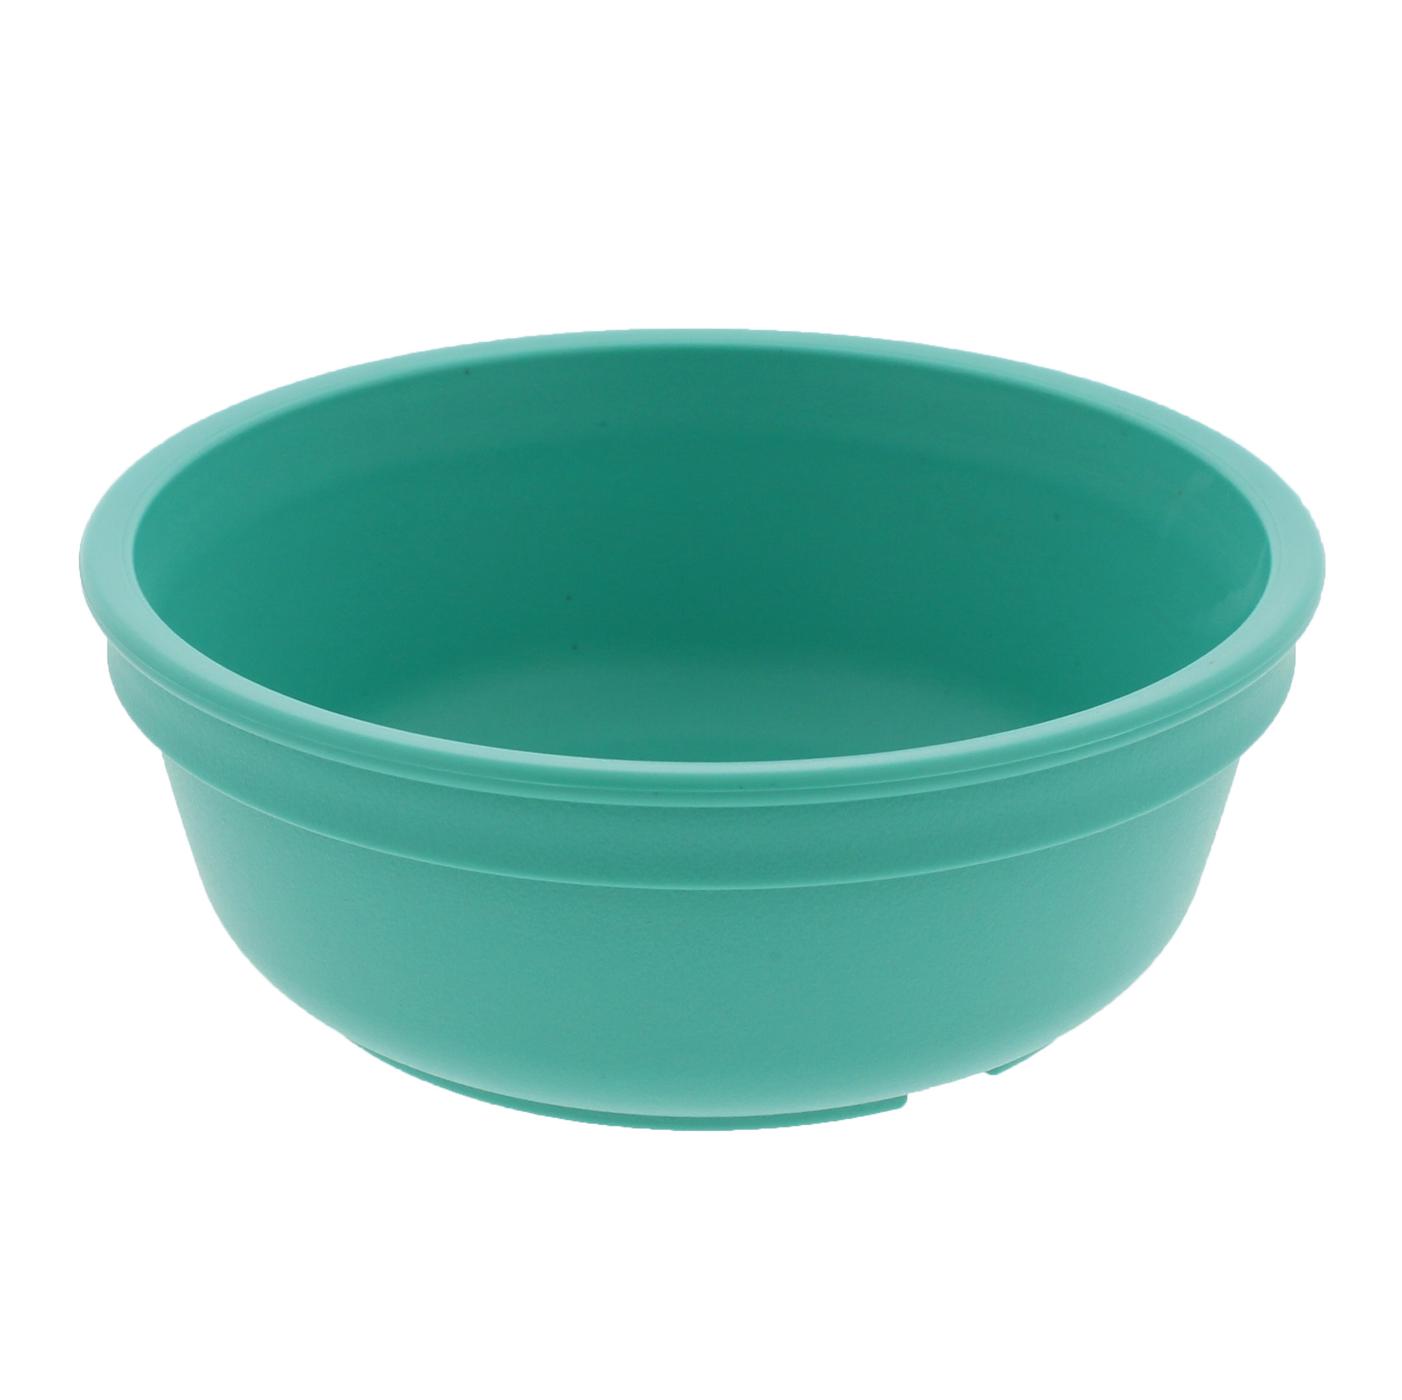 Re-Play Toddler Bowl, Assorted Colors; image 4 of 6